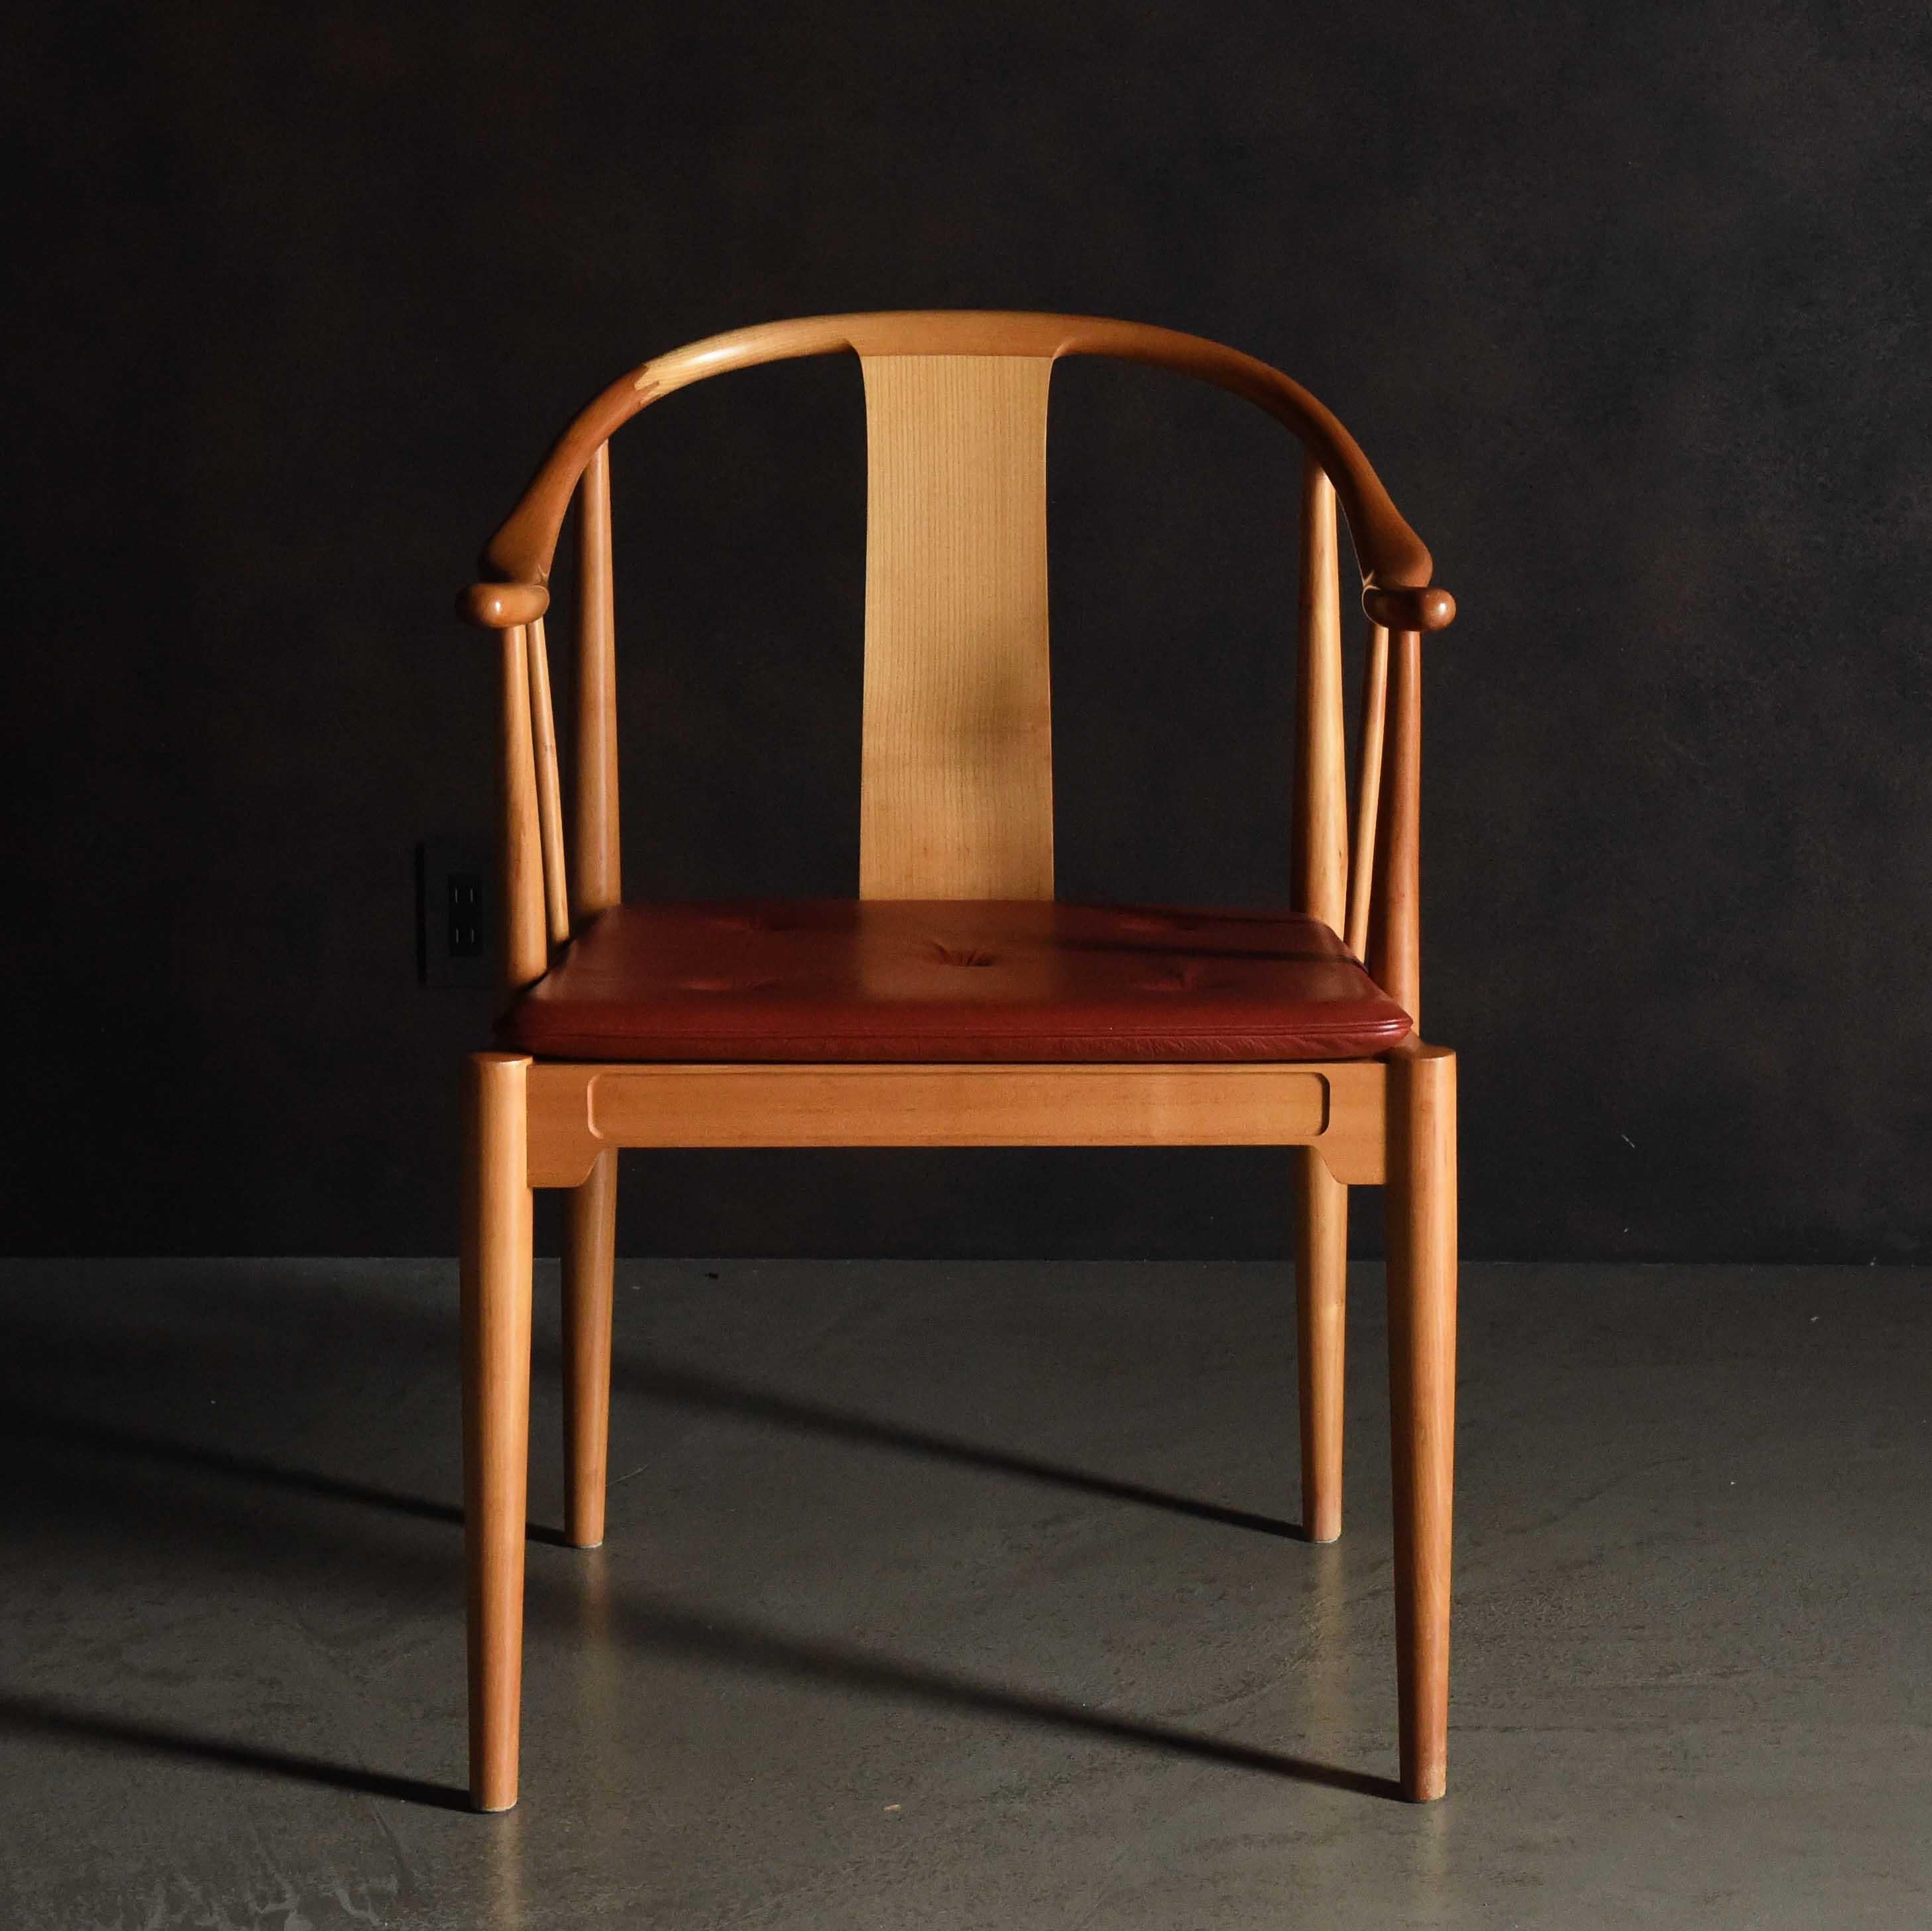 The China Chair is the only pure wooden chair in Fritz Hansen's collection. It was inspired by the design of the 